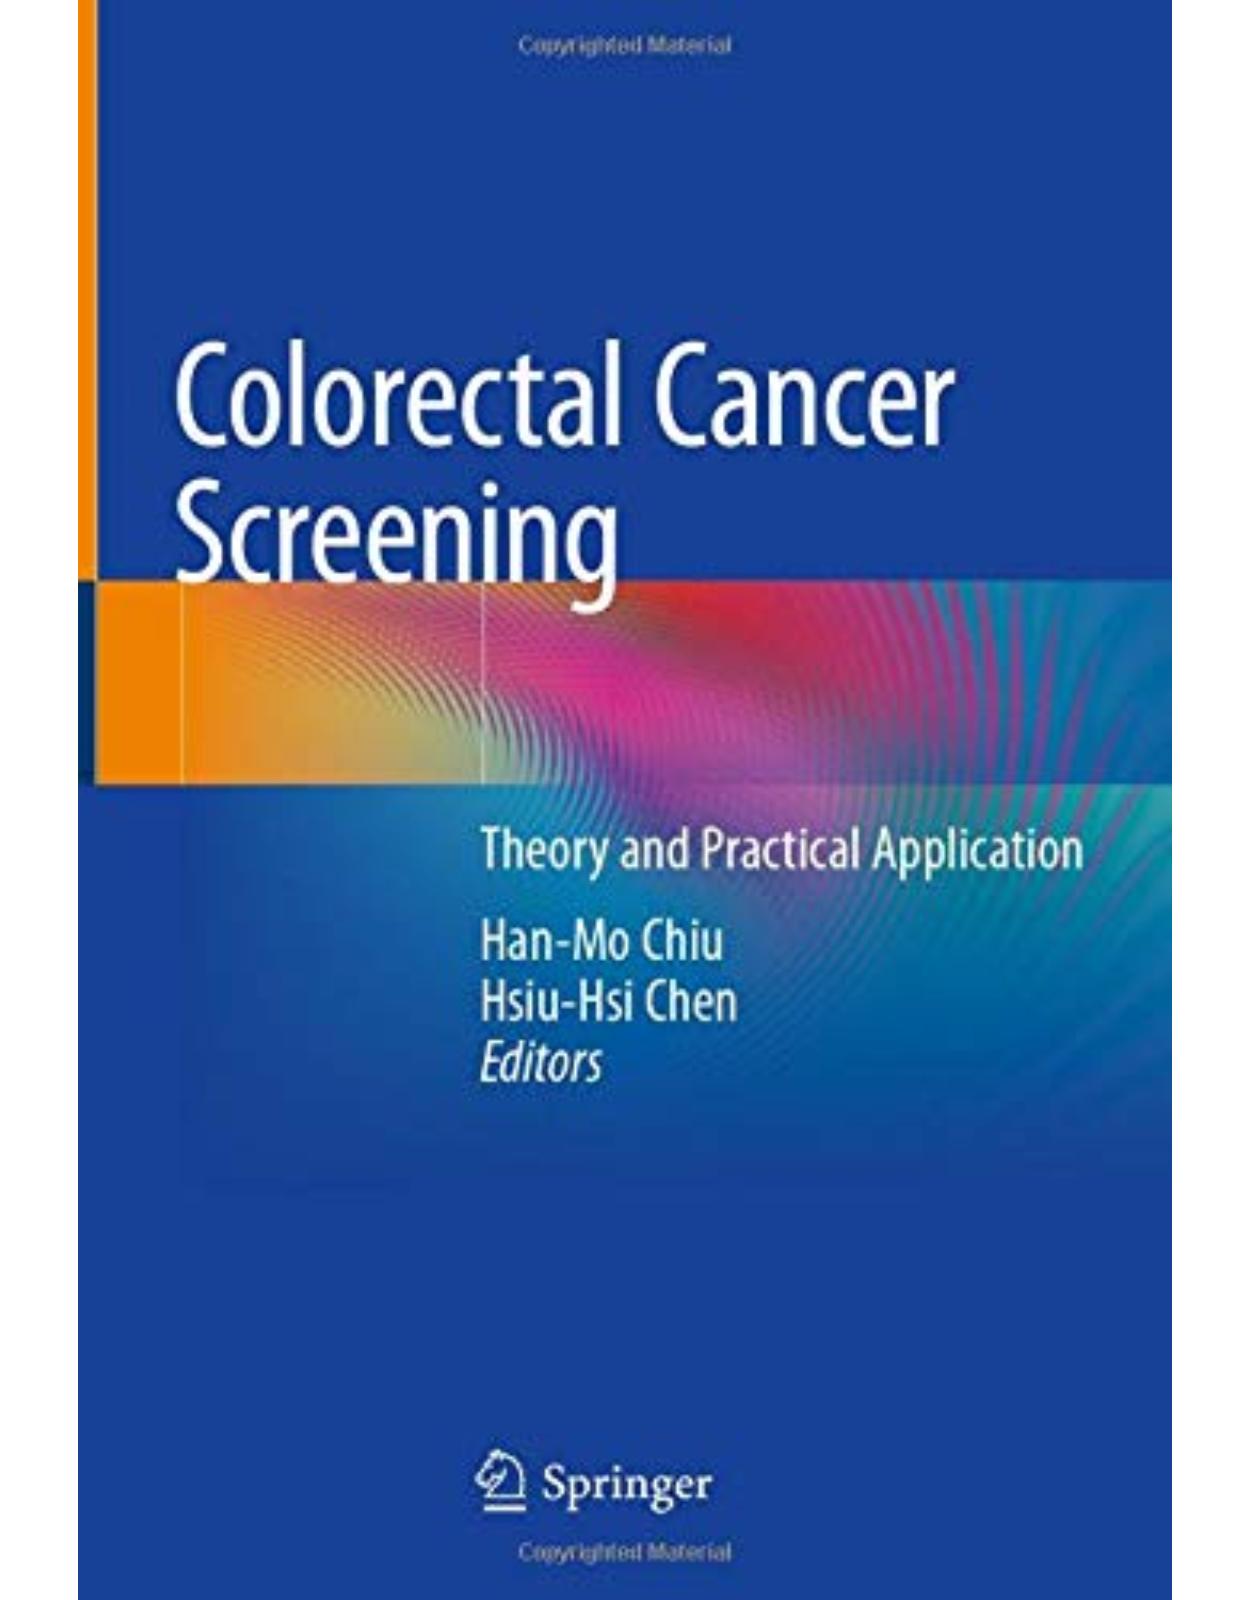 Colorectal Cancer Screening: Theory and Practical Application